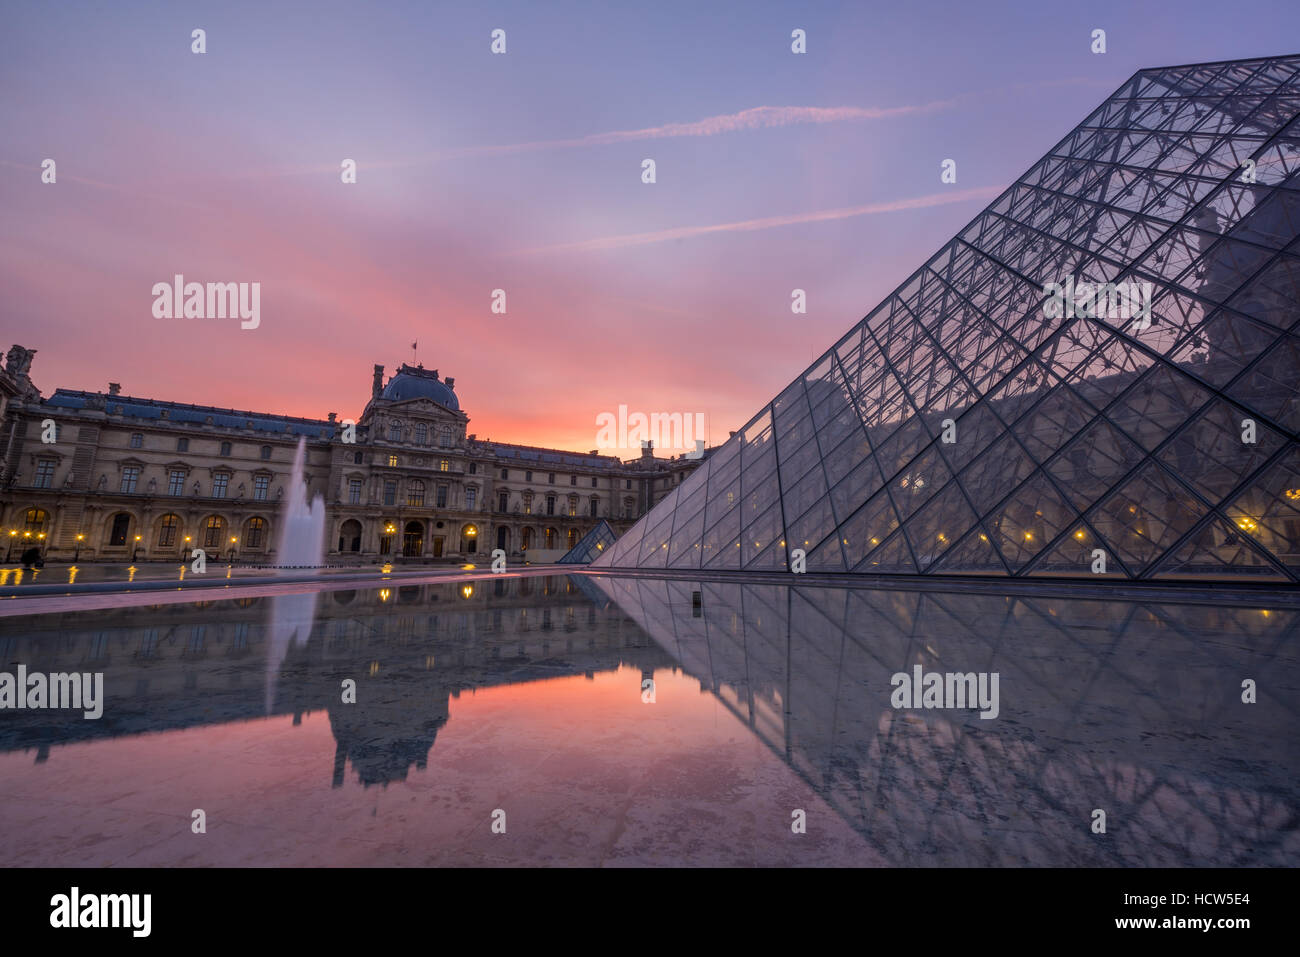 PARIS, FRANCE - DECEMBER 09, 2016: View of famous Louvre Museum with ...